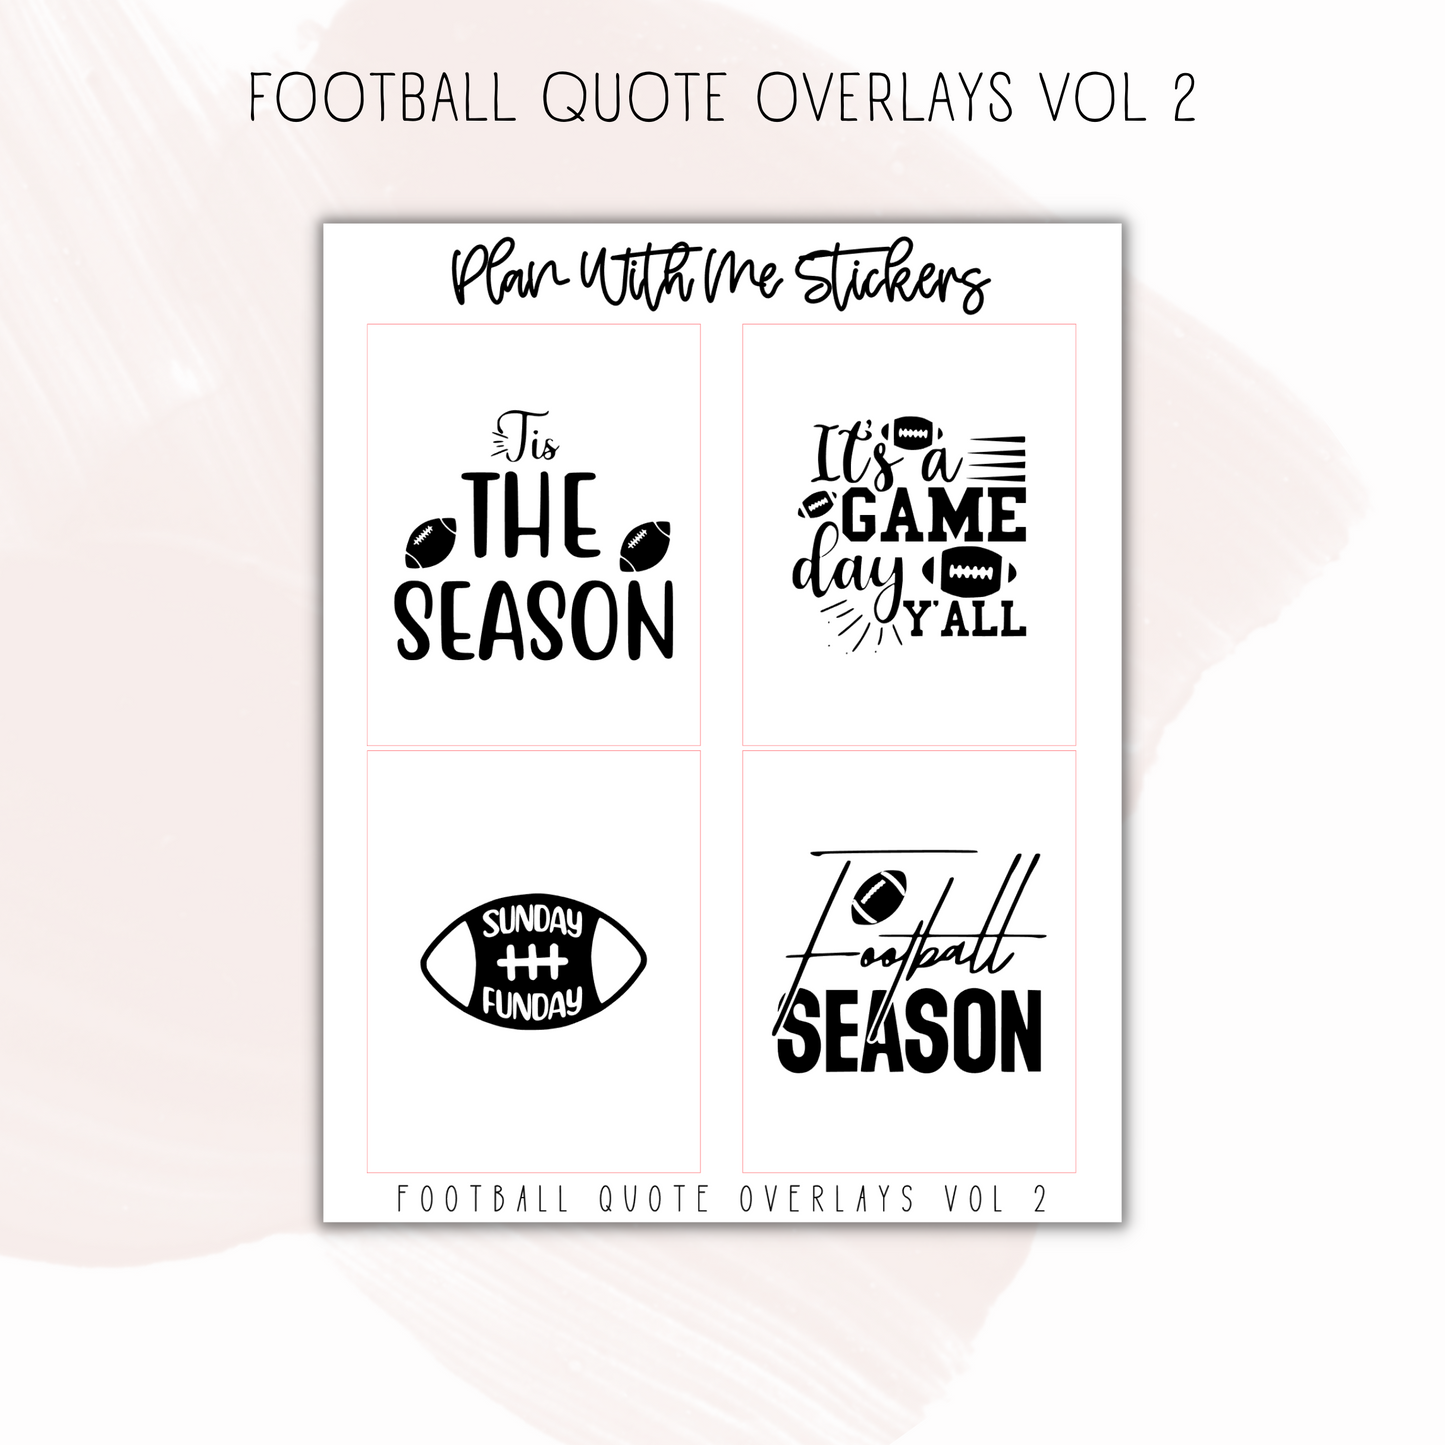 Football Quote Overlays Vol 2